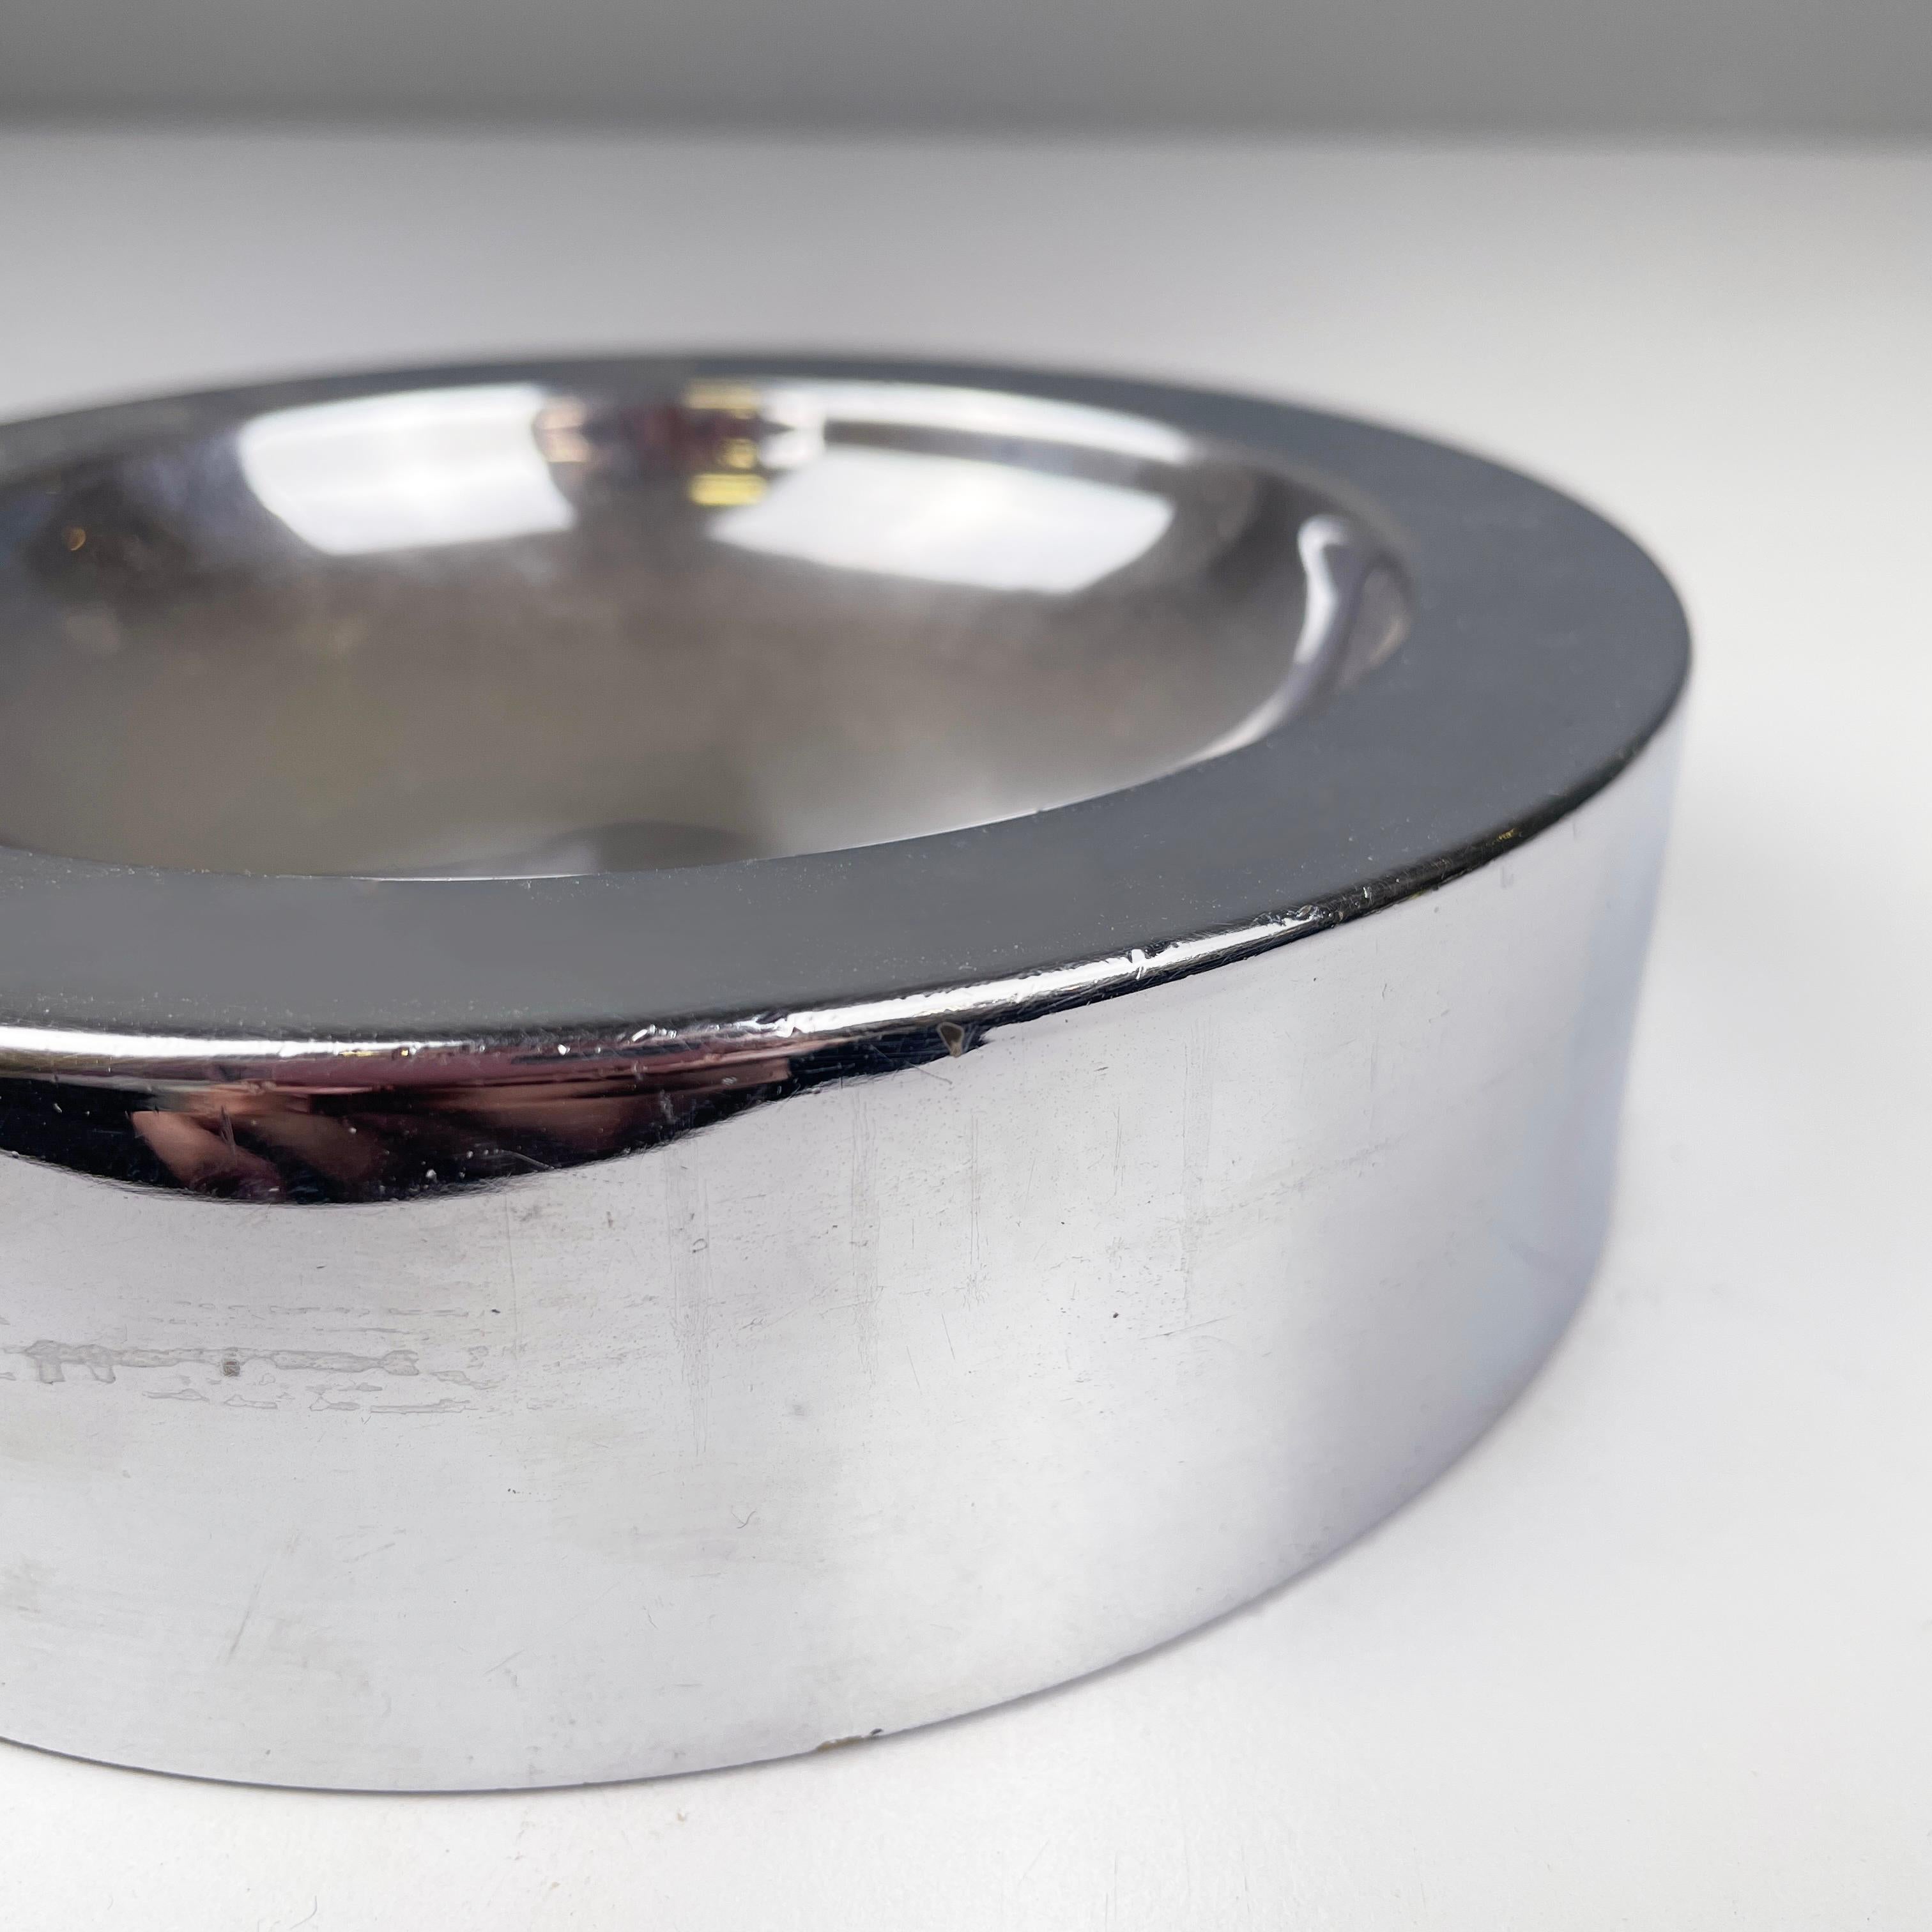 Late 20th Century Italian modern round table ashtray in steel by Dada International Design, 1980s For Sale